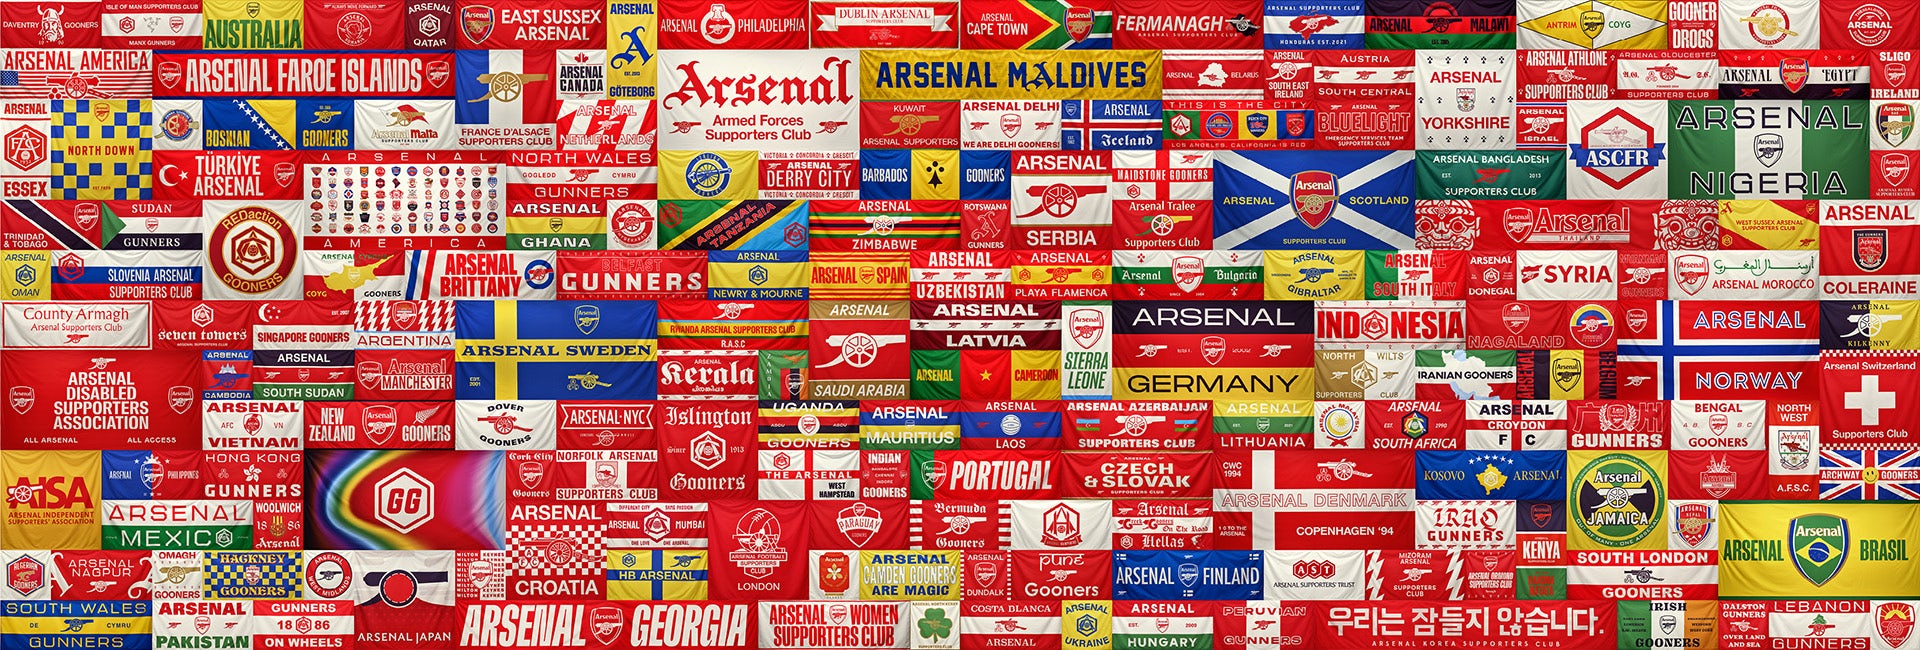 Image shows an Arsenal artwork by Jeremy Deller comprising over 100 various flags and banners brought together in a tapestry